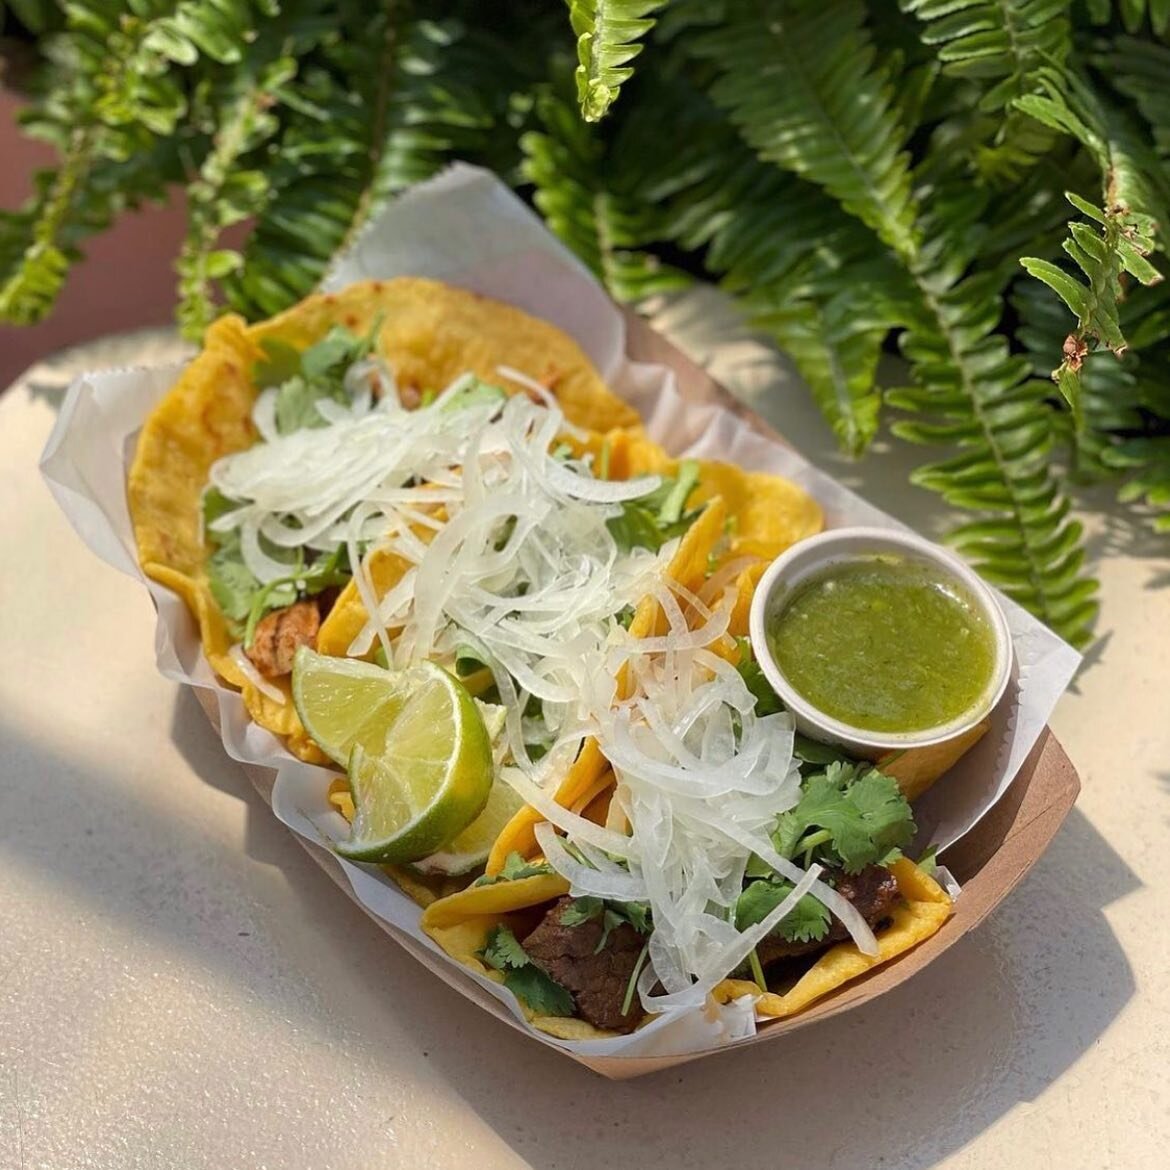 🌮🌮🌮 Coming in hot from Houston @pandetaco is popping up tomorrow at ani&rsquo;s from 3pm to sold out for the third weekend of @thefront.market where you can support small businesses from 11am-5pm. Scroll for the menu! 🤤